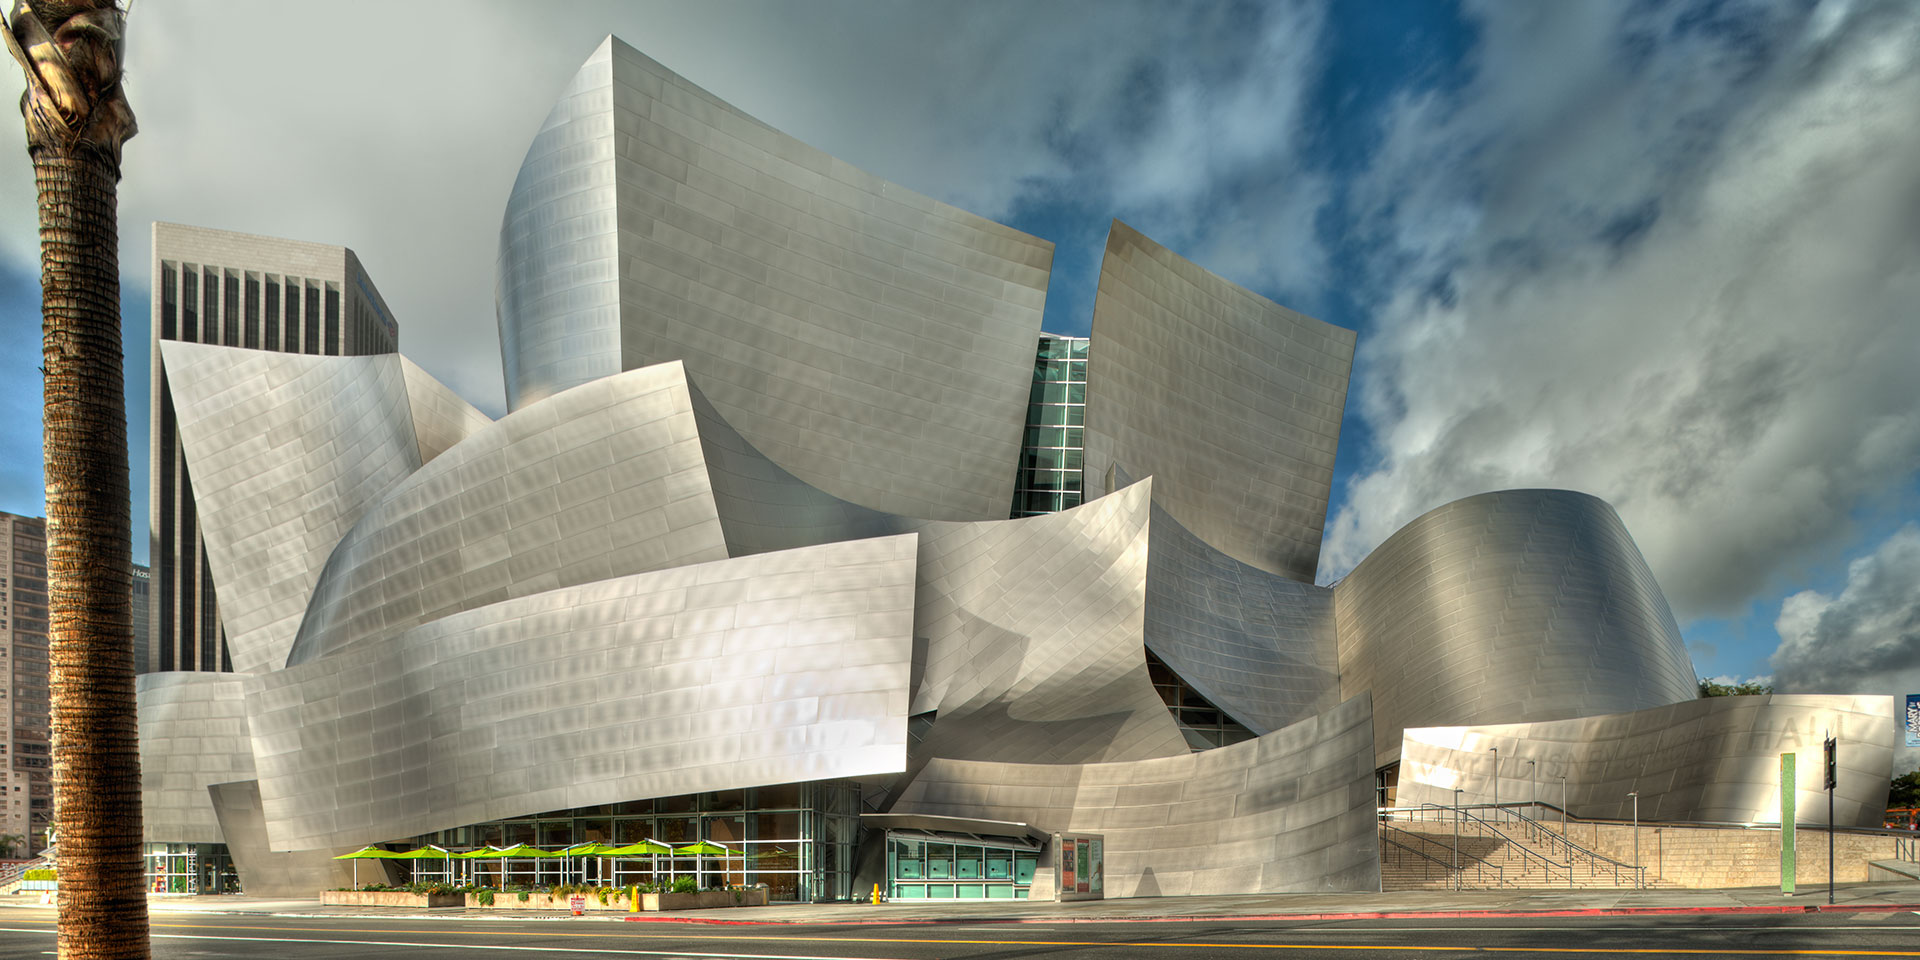 A Day Well Spent: Hunt Down L.A.’s Architectural Treasures, from the Iconic to the Quirky